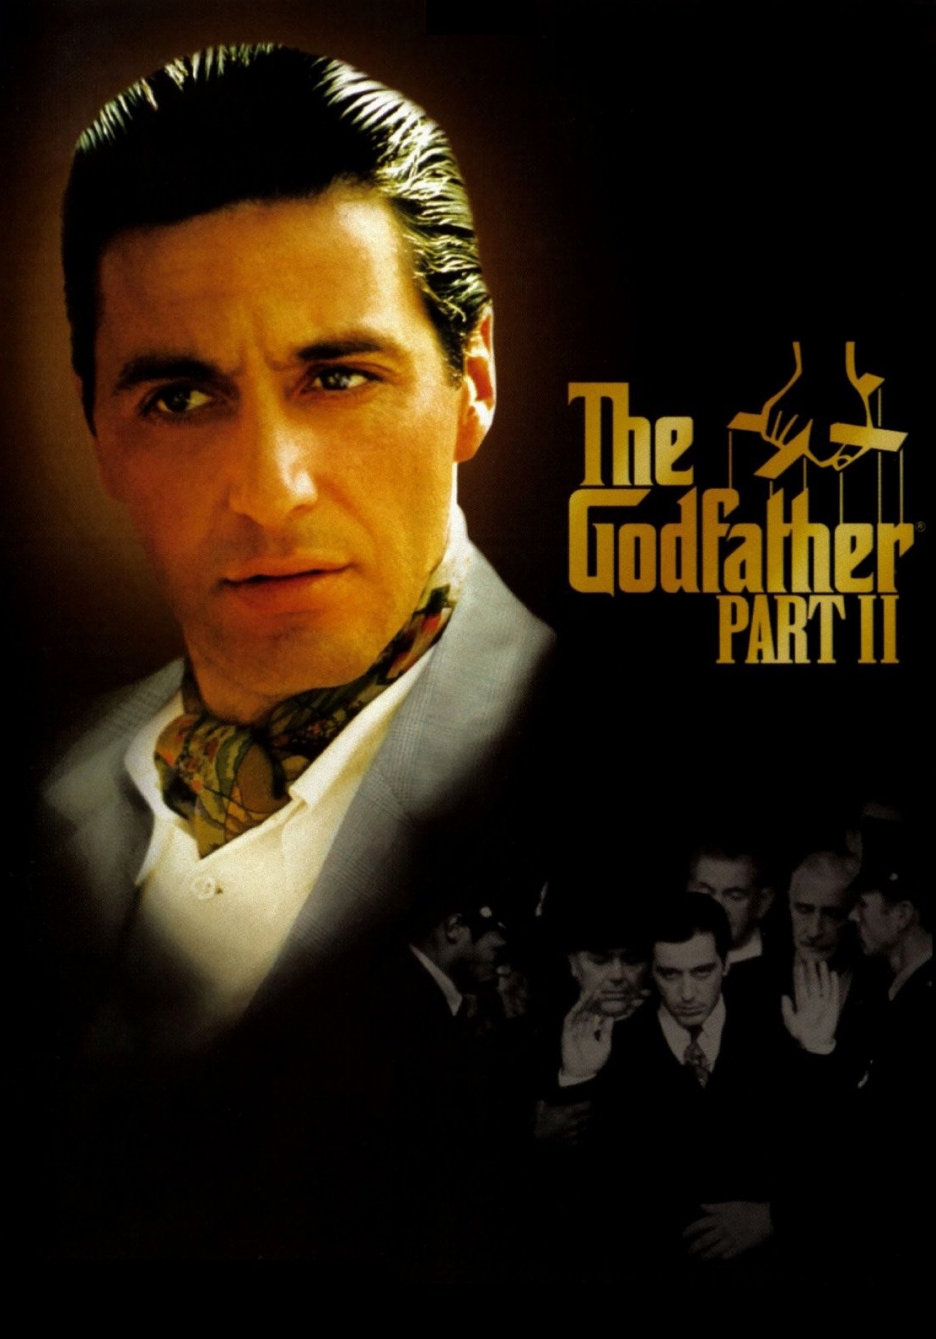 The Godfather: Part II Backgrounds, Compatible - PC, Mobile, Gadgets| 936x1339 px